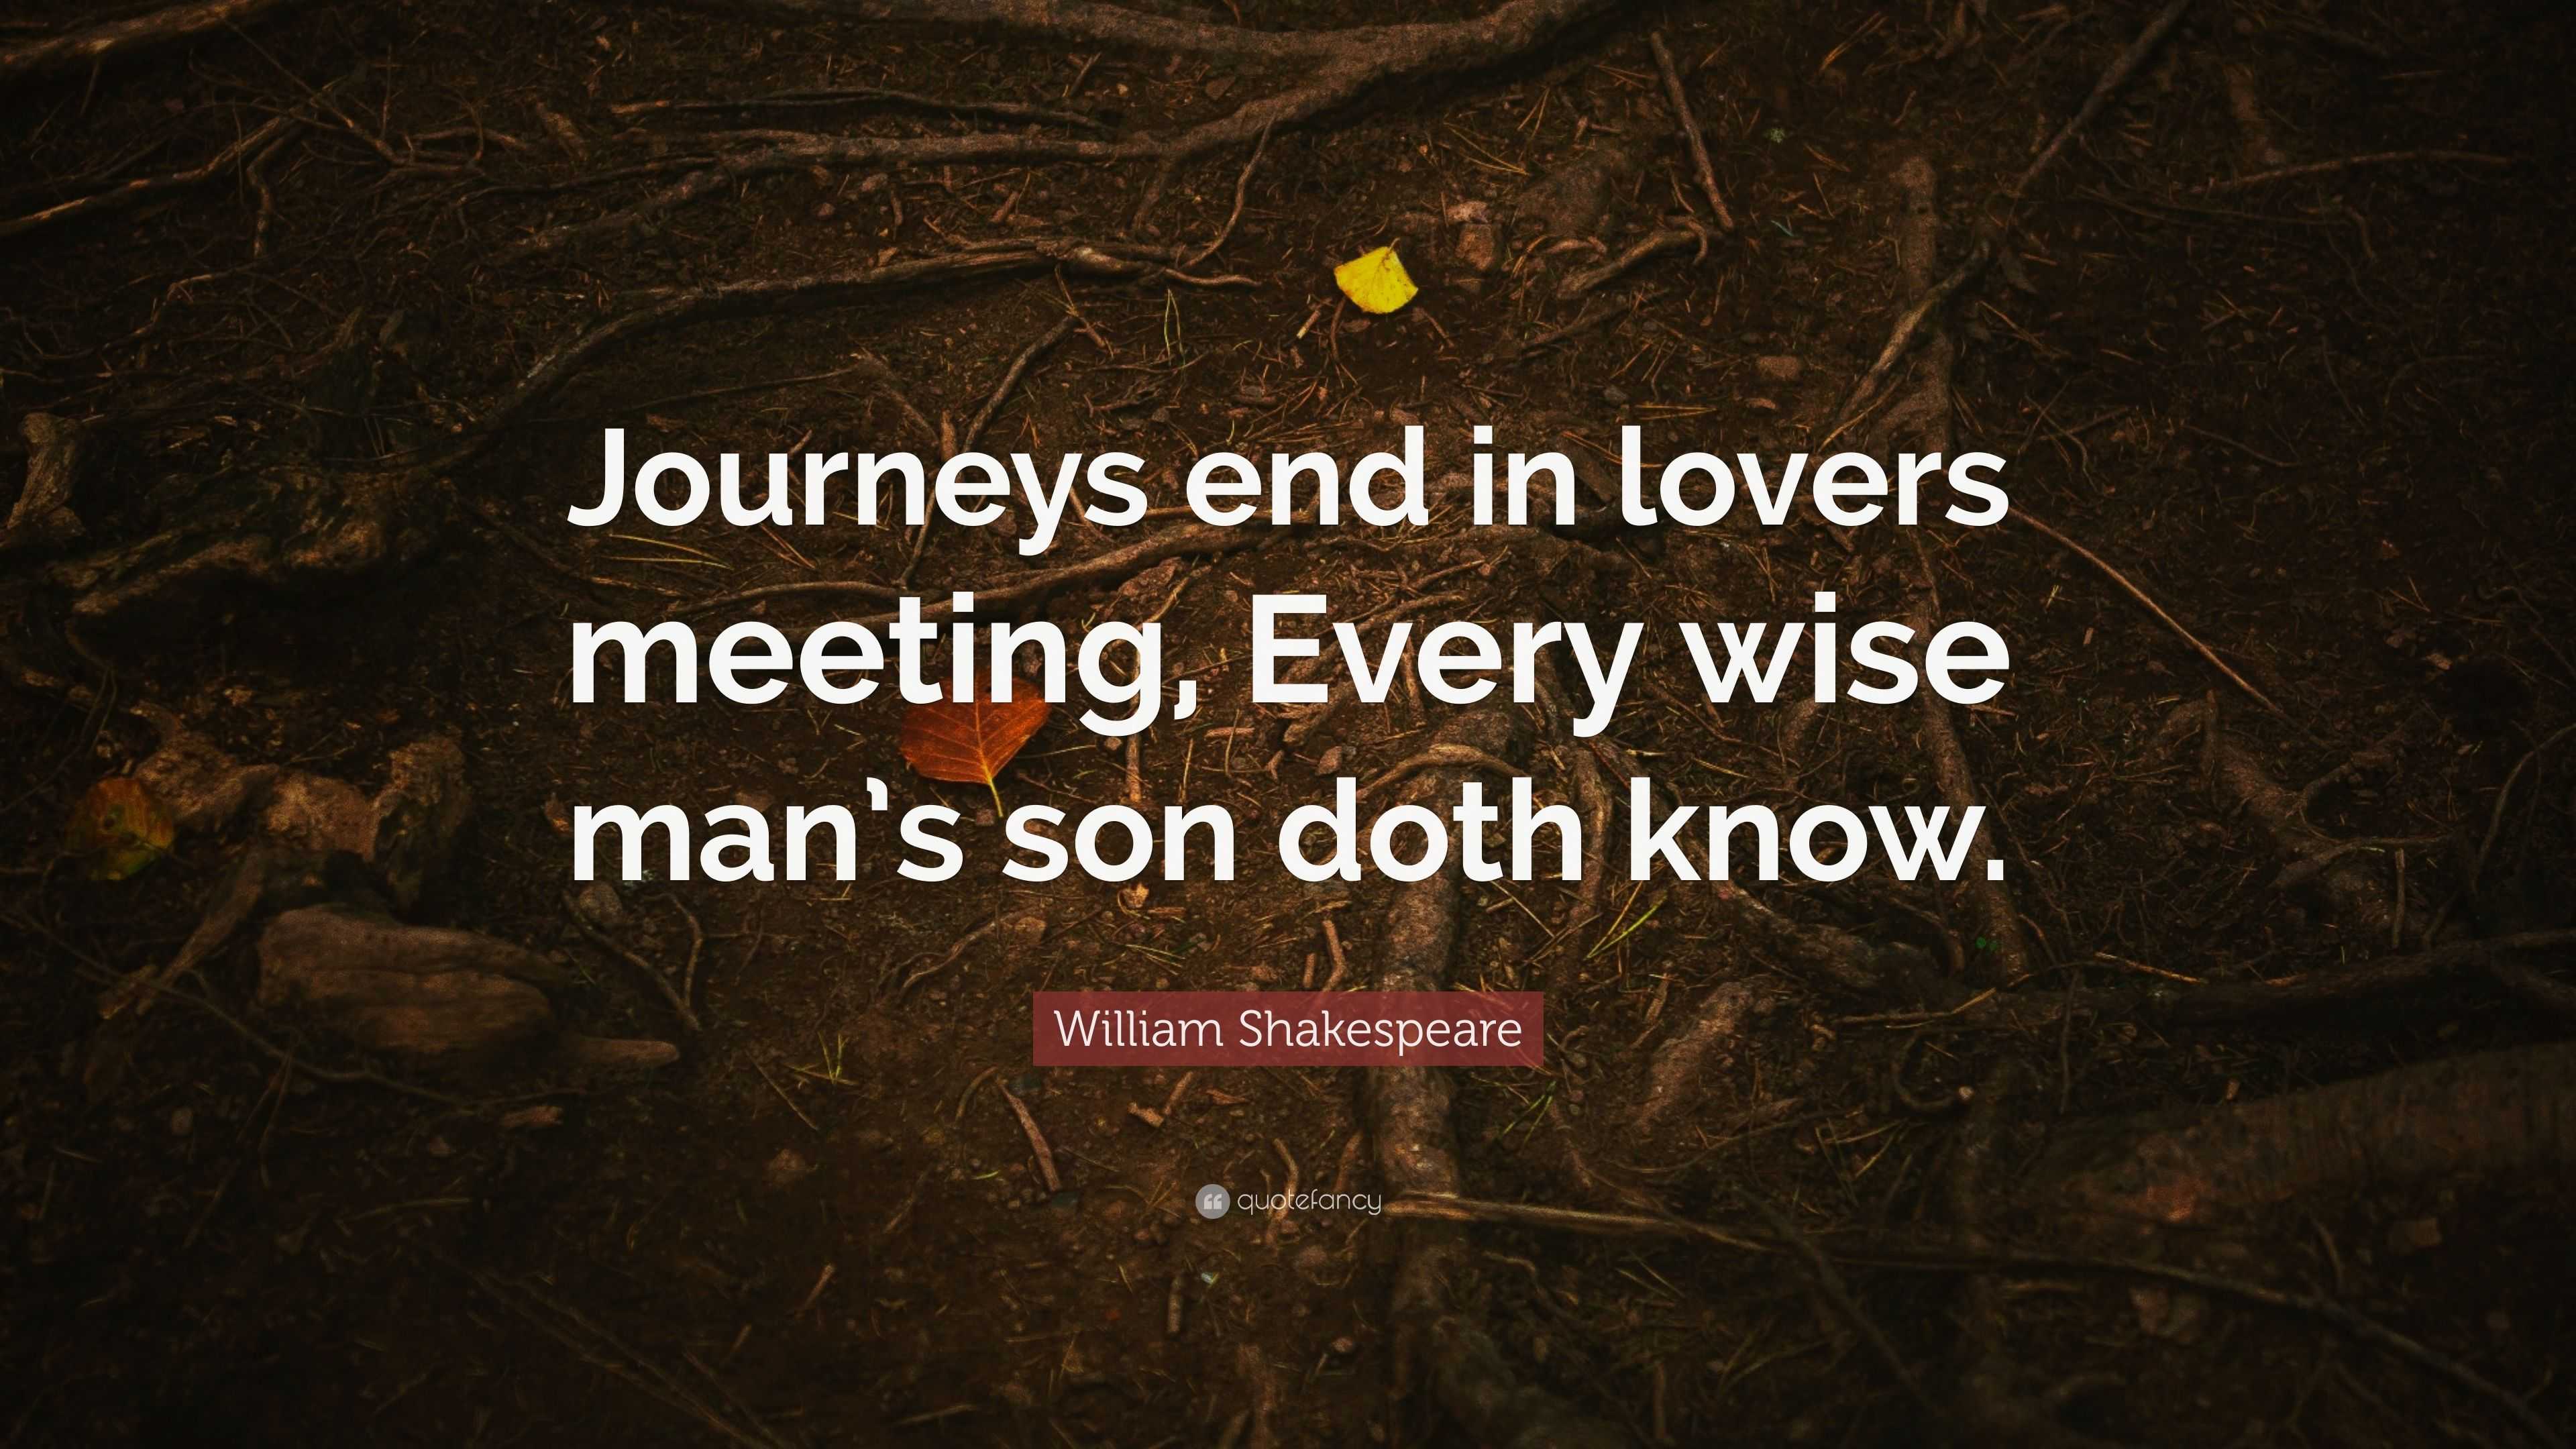 journey's end at lovers meeting